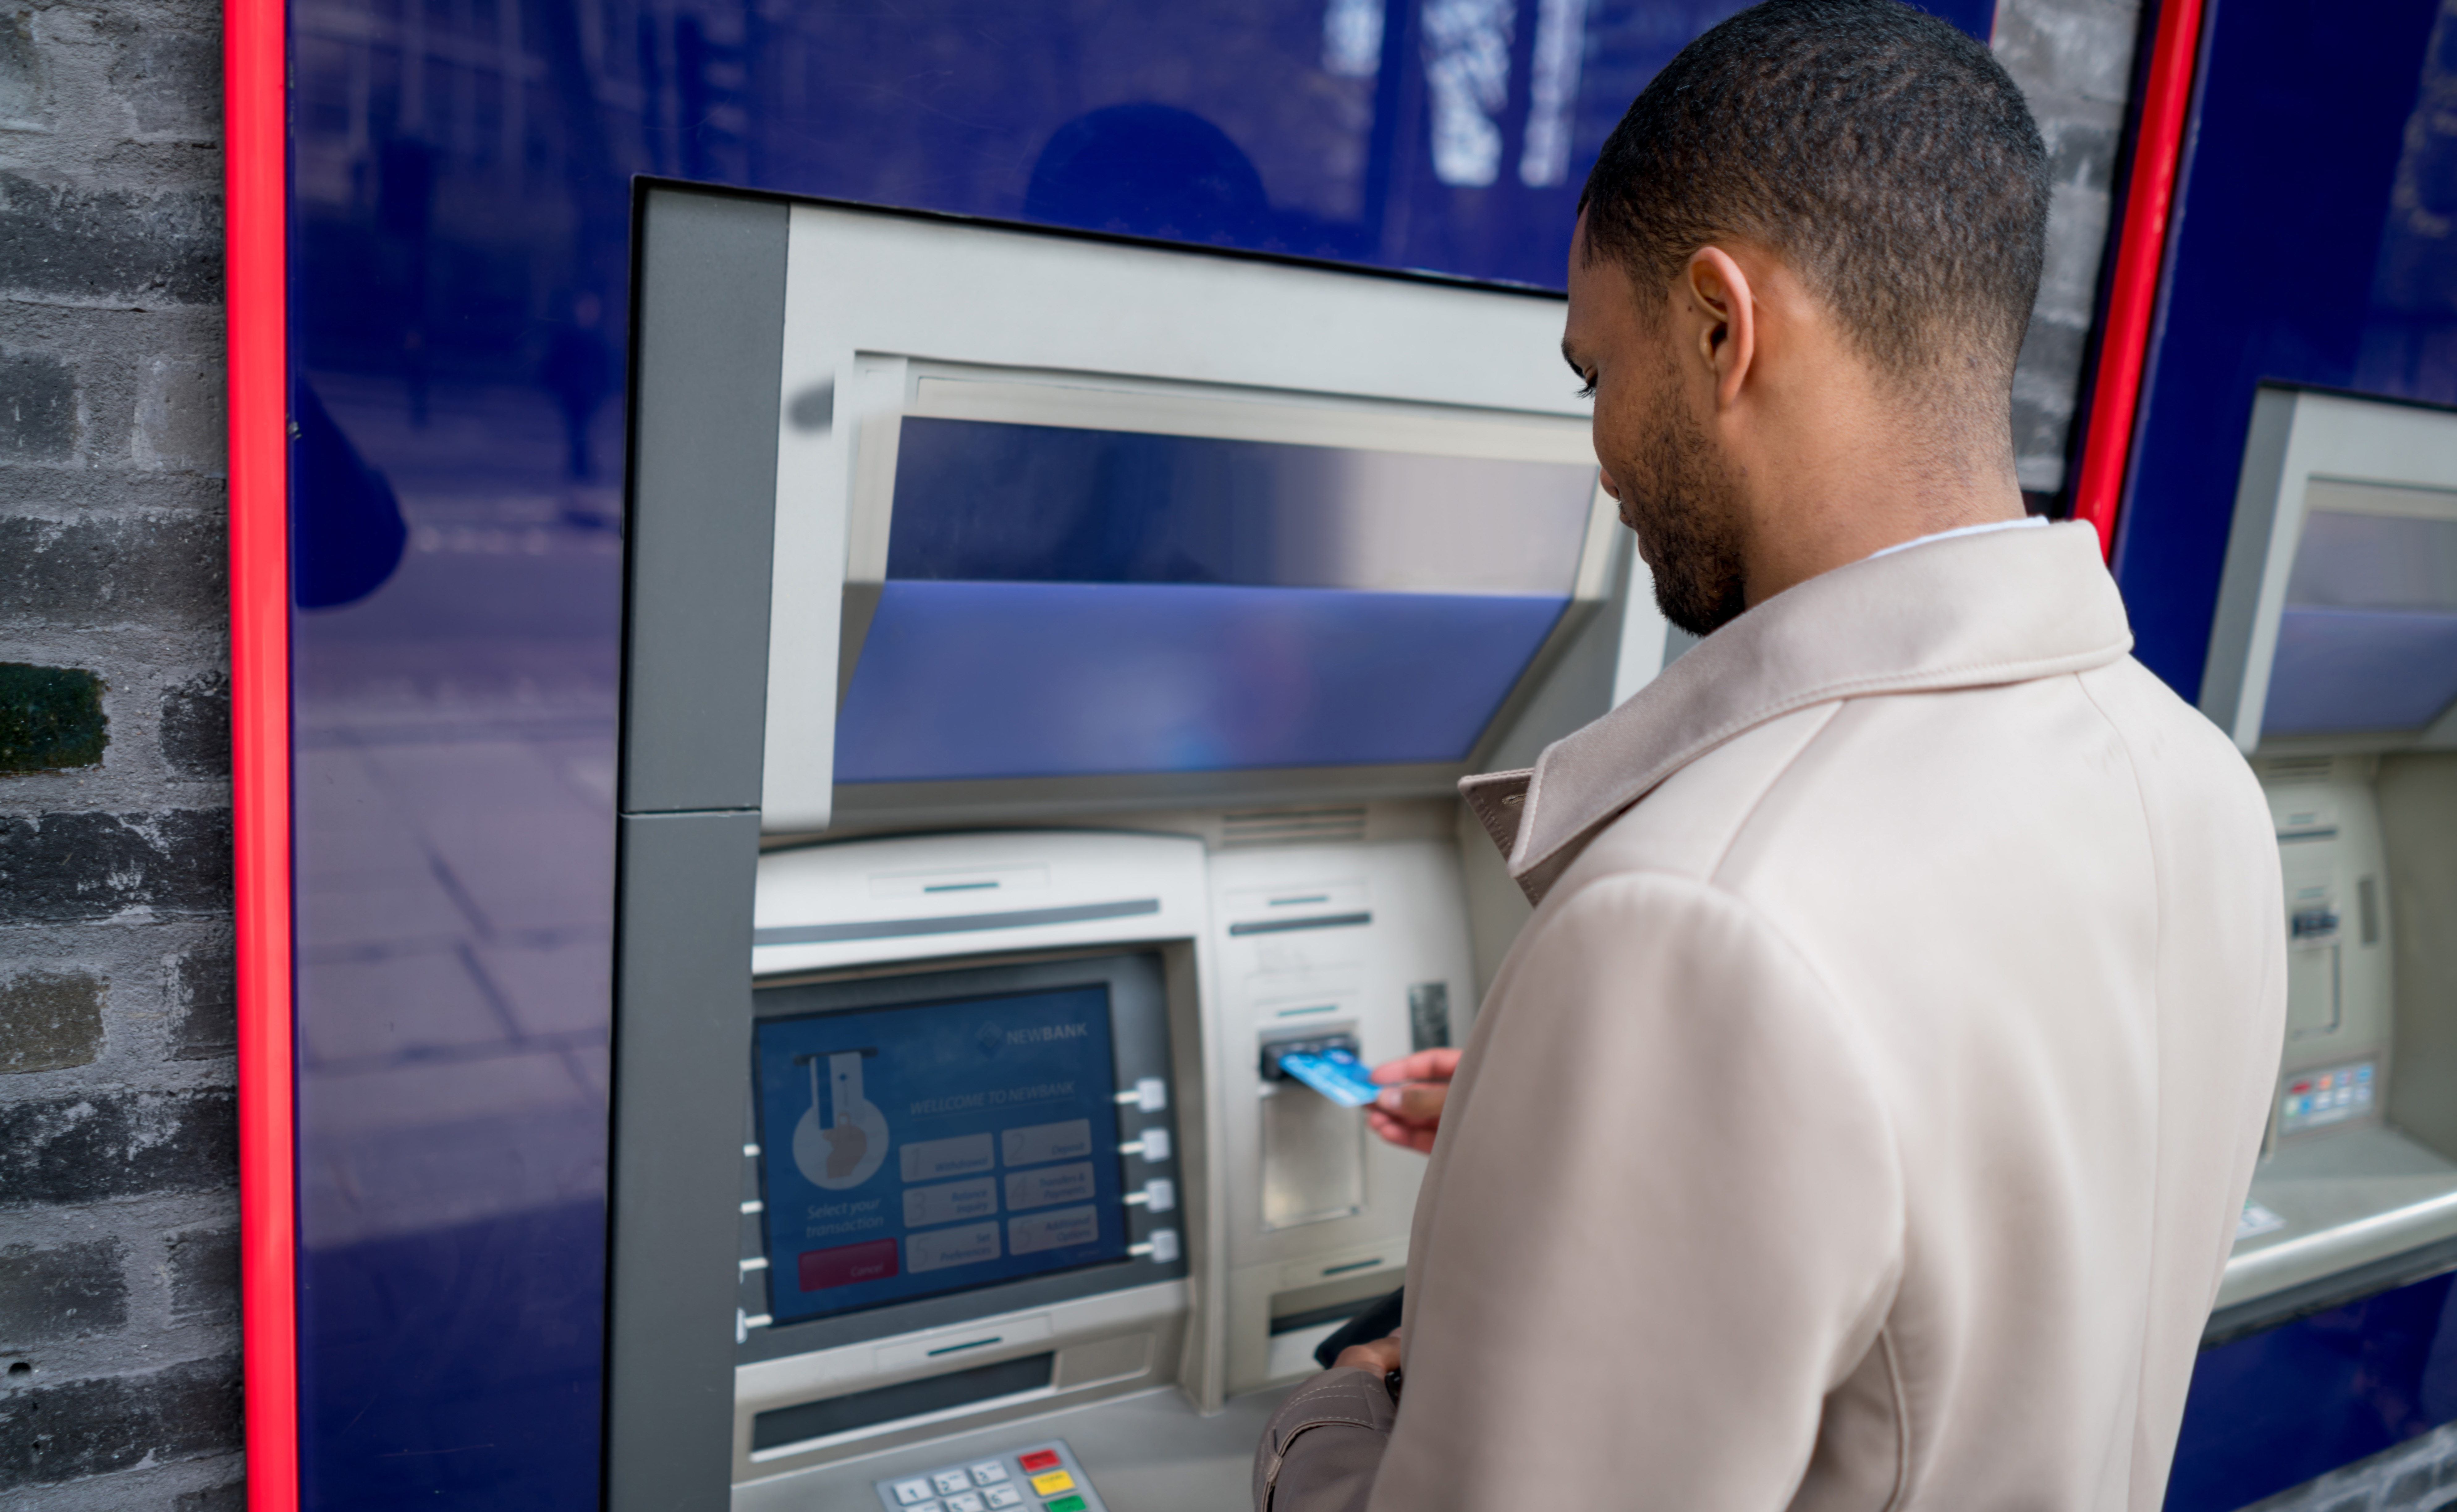 man standing in front of ATM machine